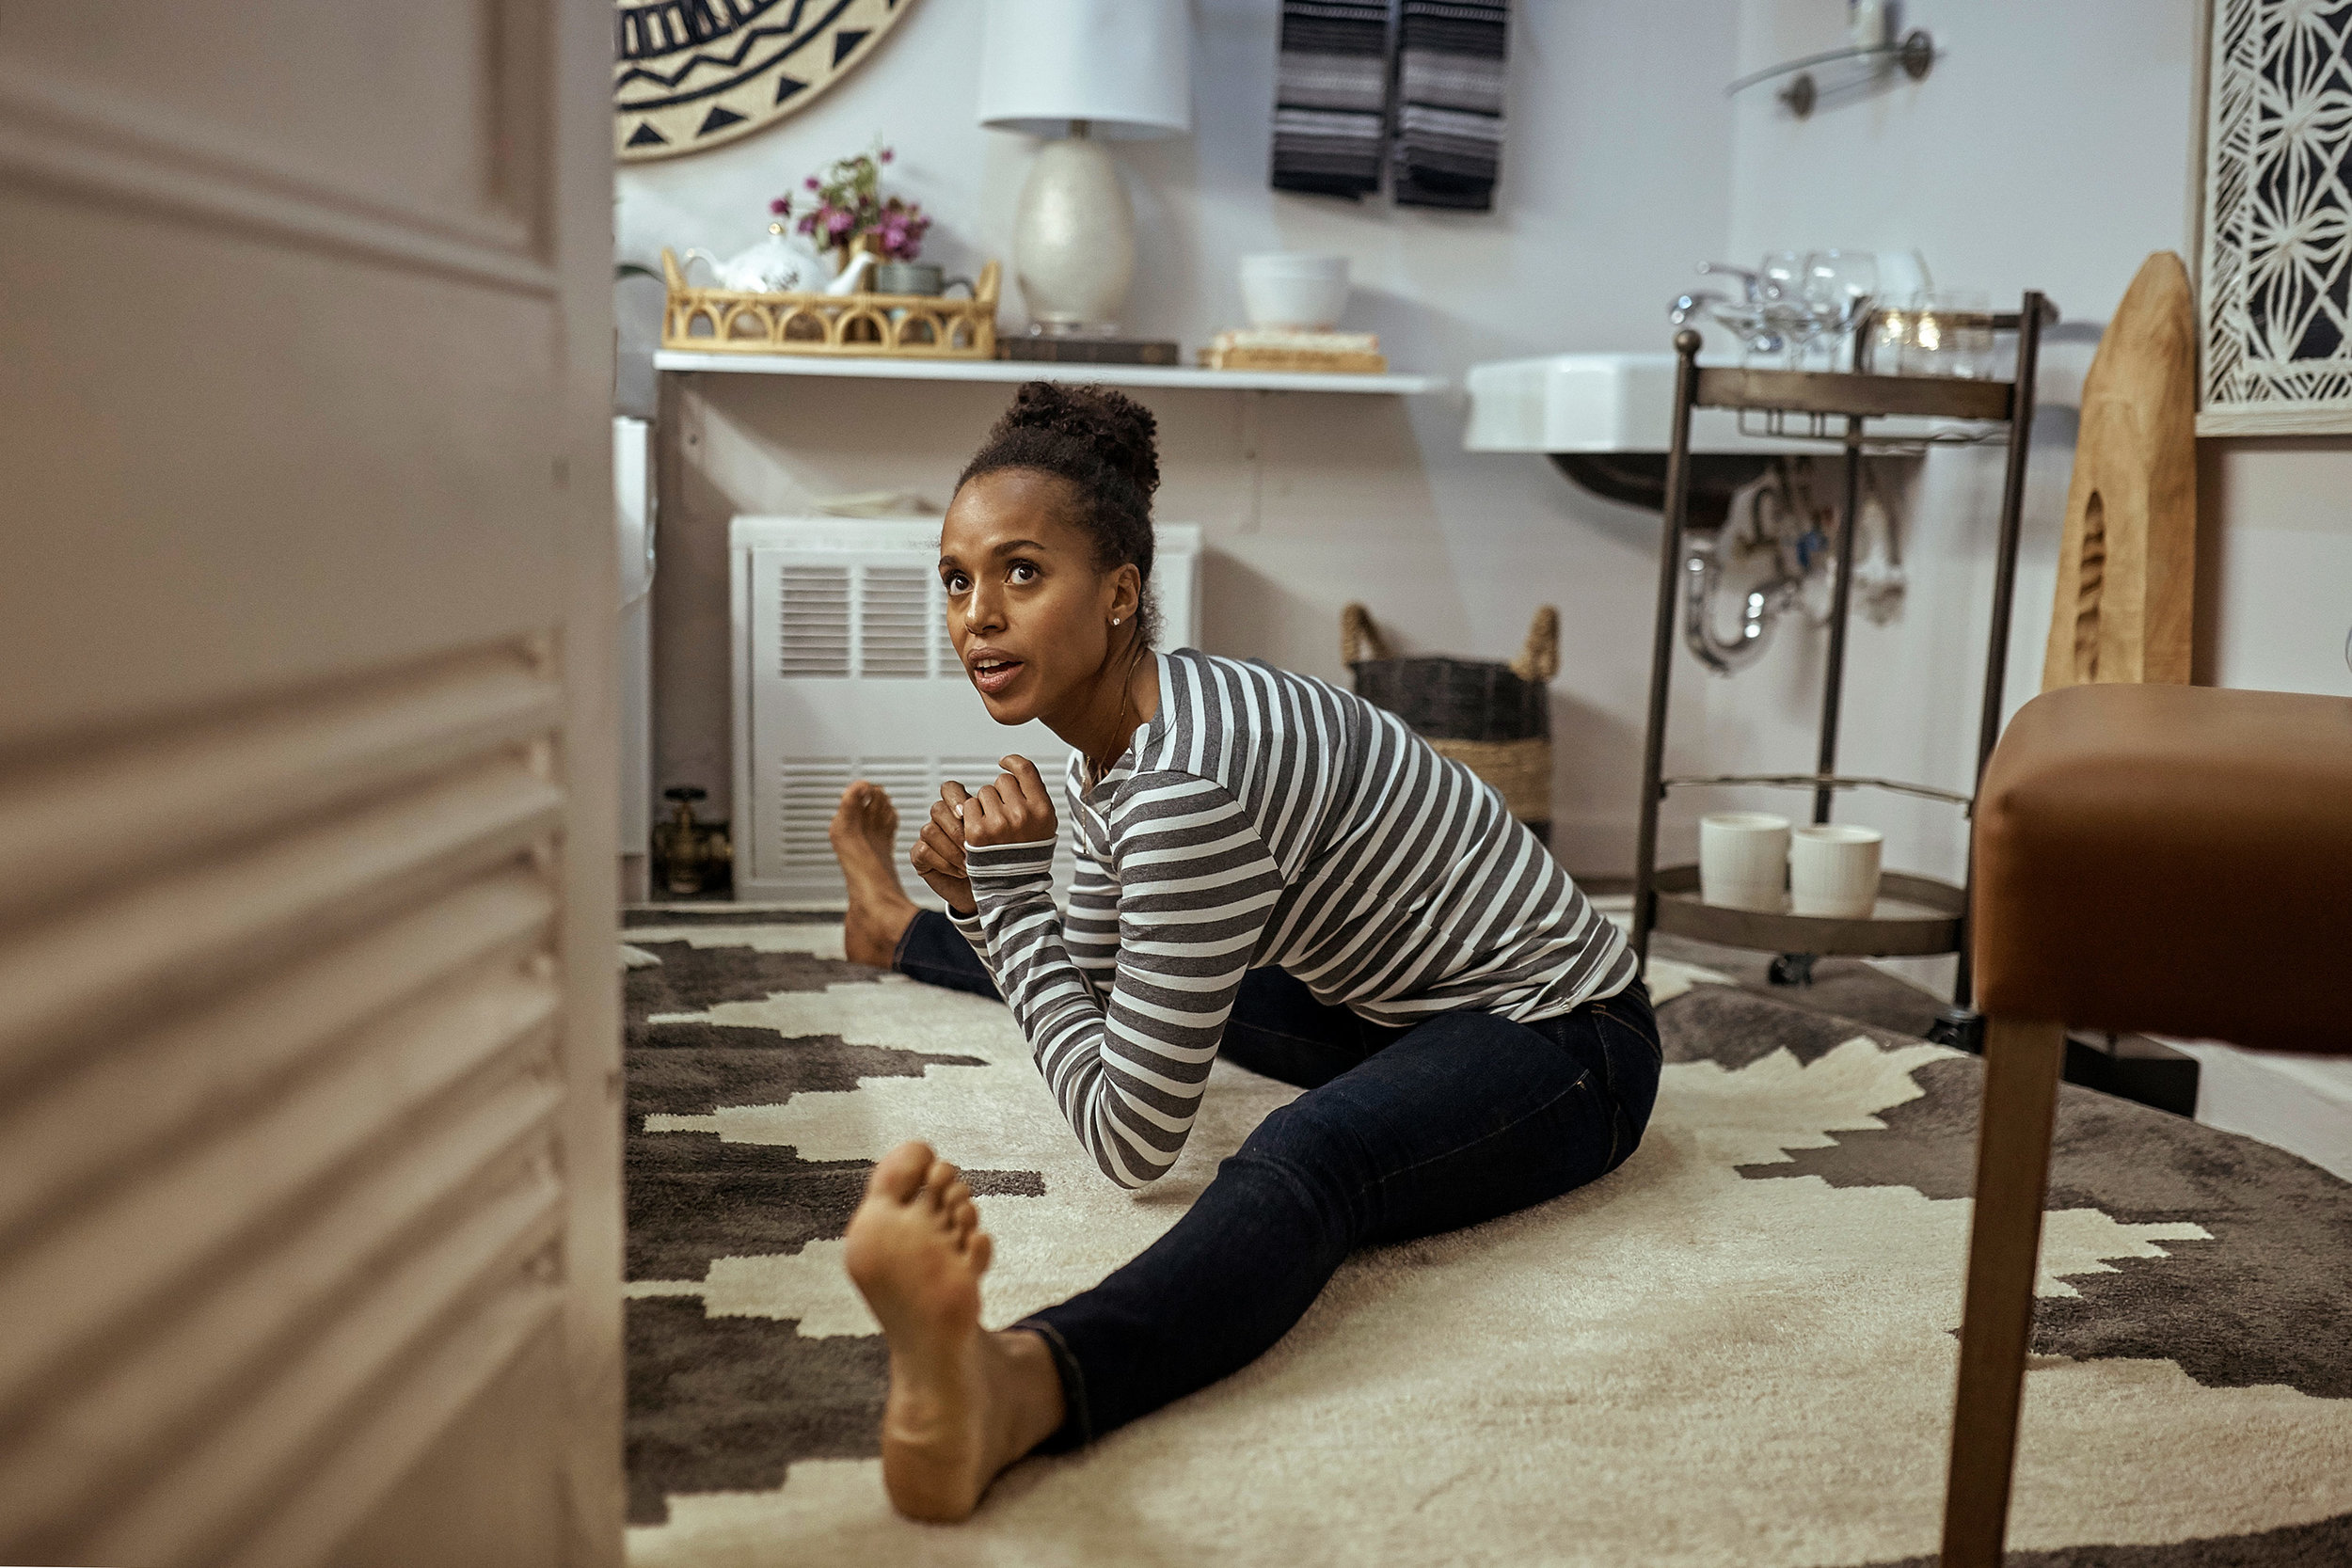   Andres Kudacki  spent four days photographing Kerry Washington in rehearsal before the opening of American Son on Broadway in 2018.   See full photo essay  here .  